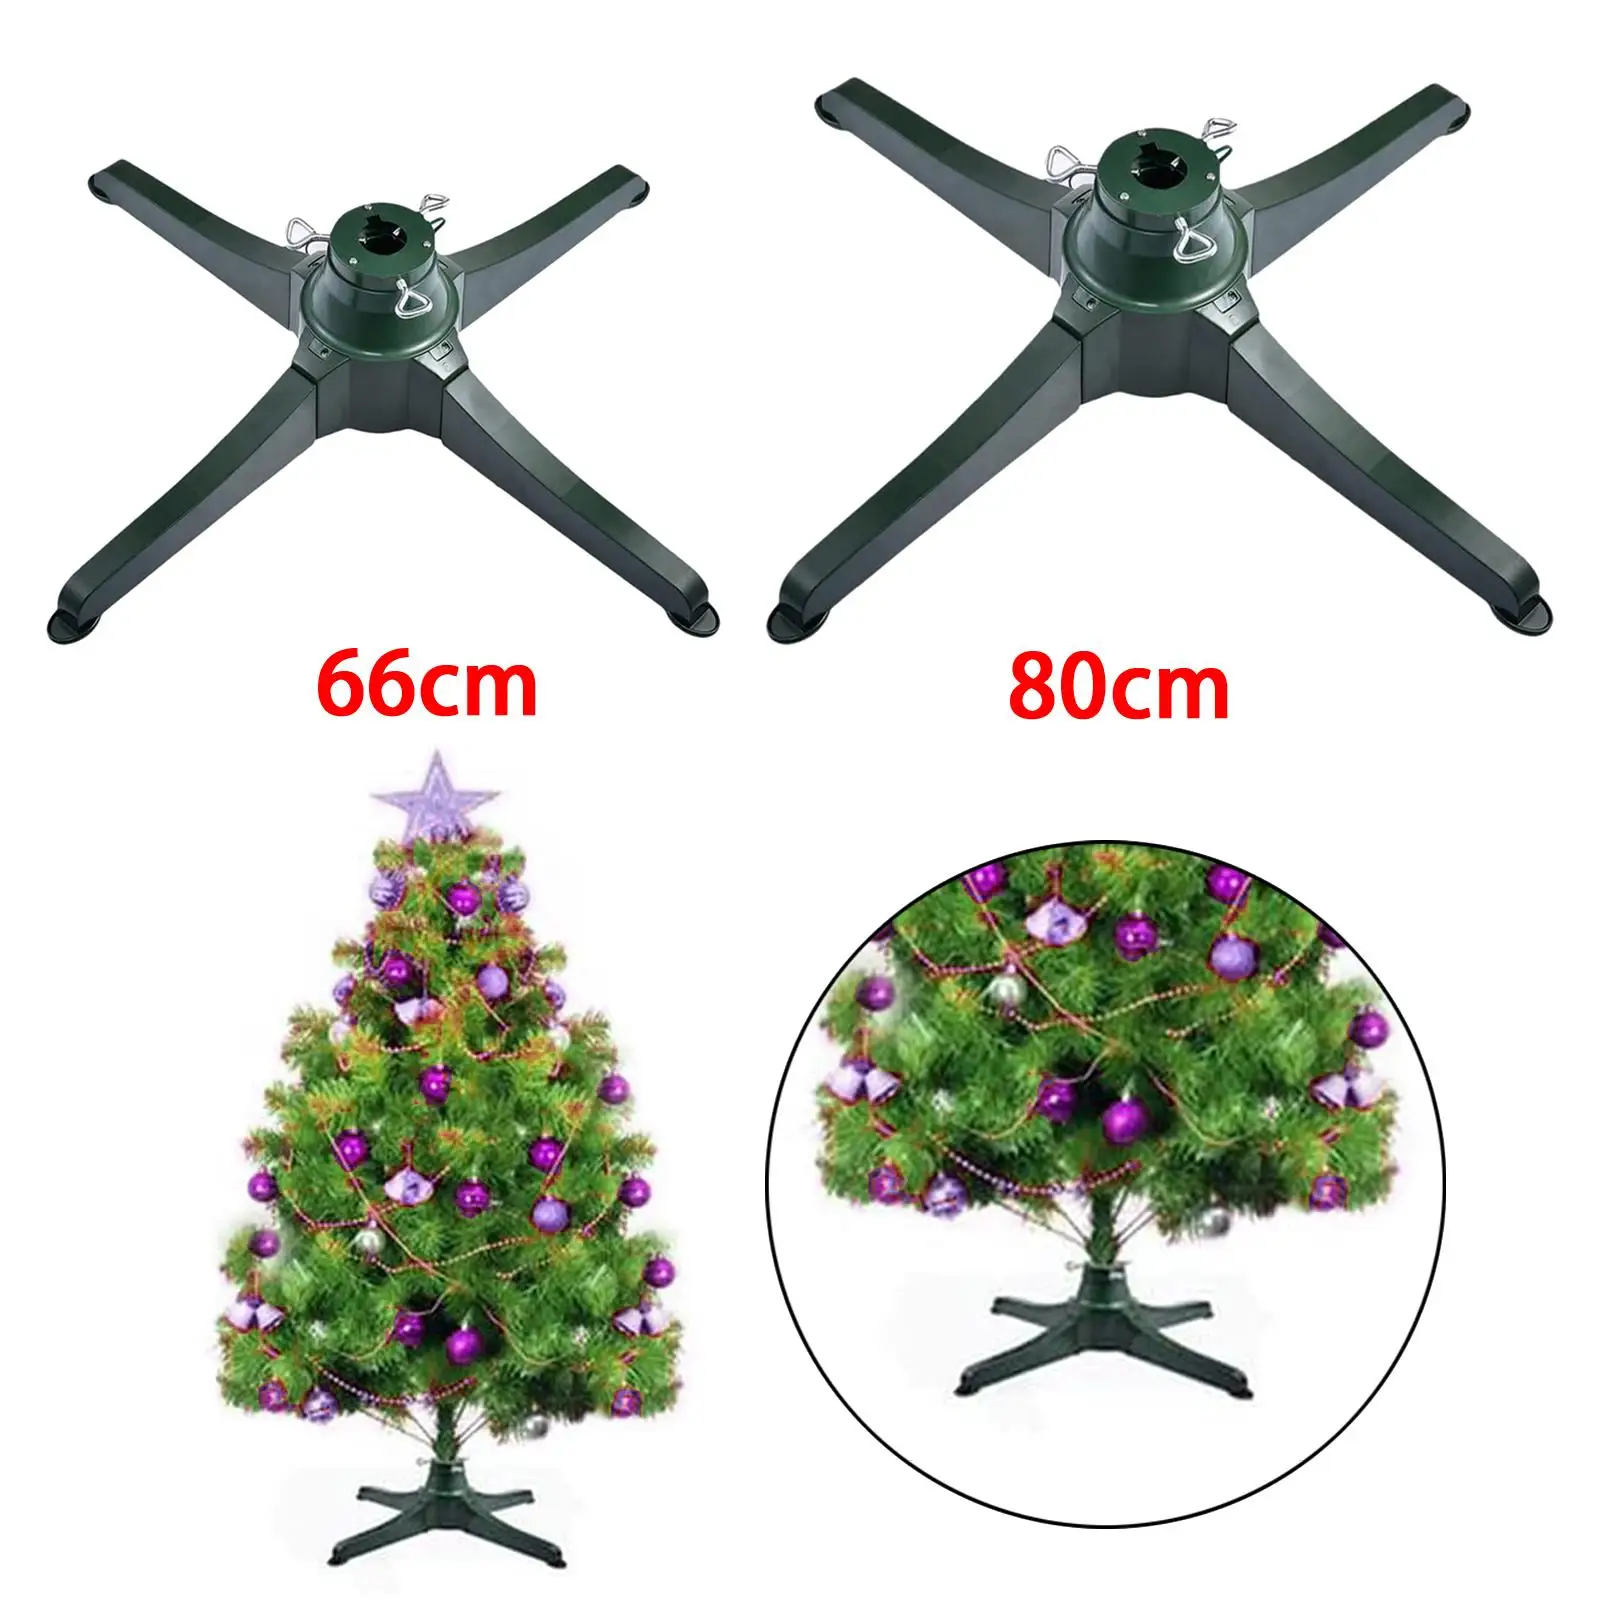 Rotating Christmas  Artificial  Trees Holder Universal Adjustable  Compatible with Most Upright Tree